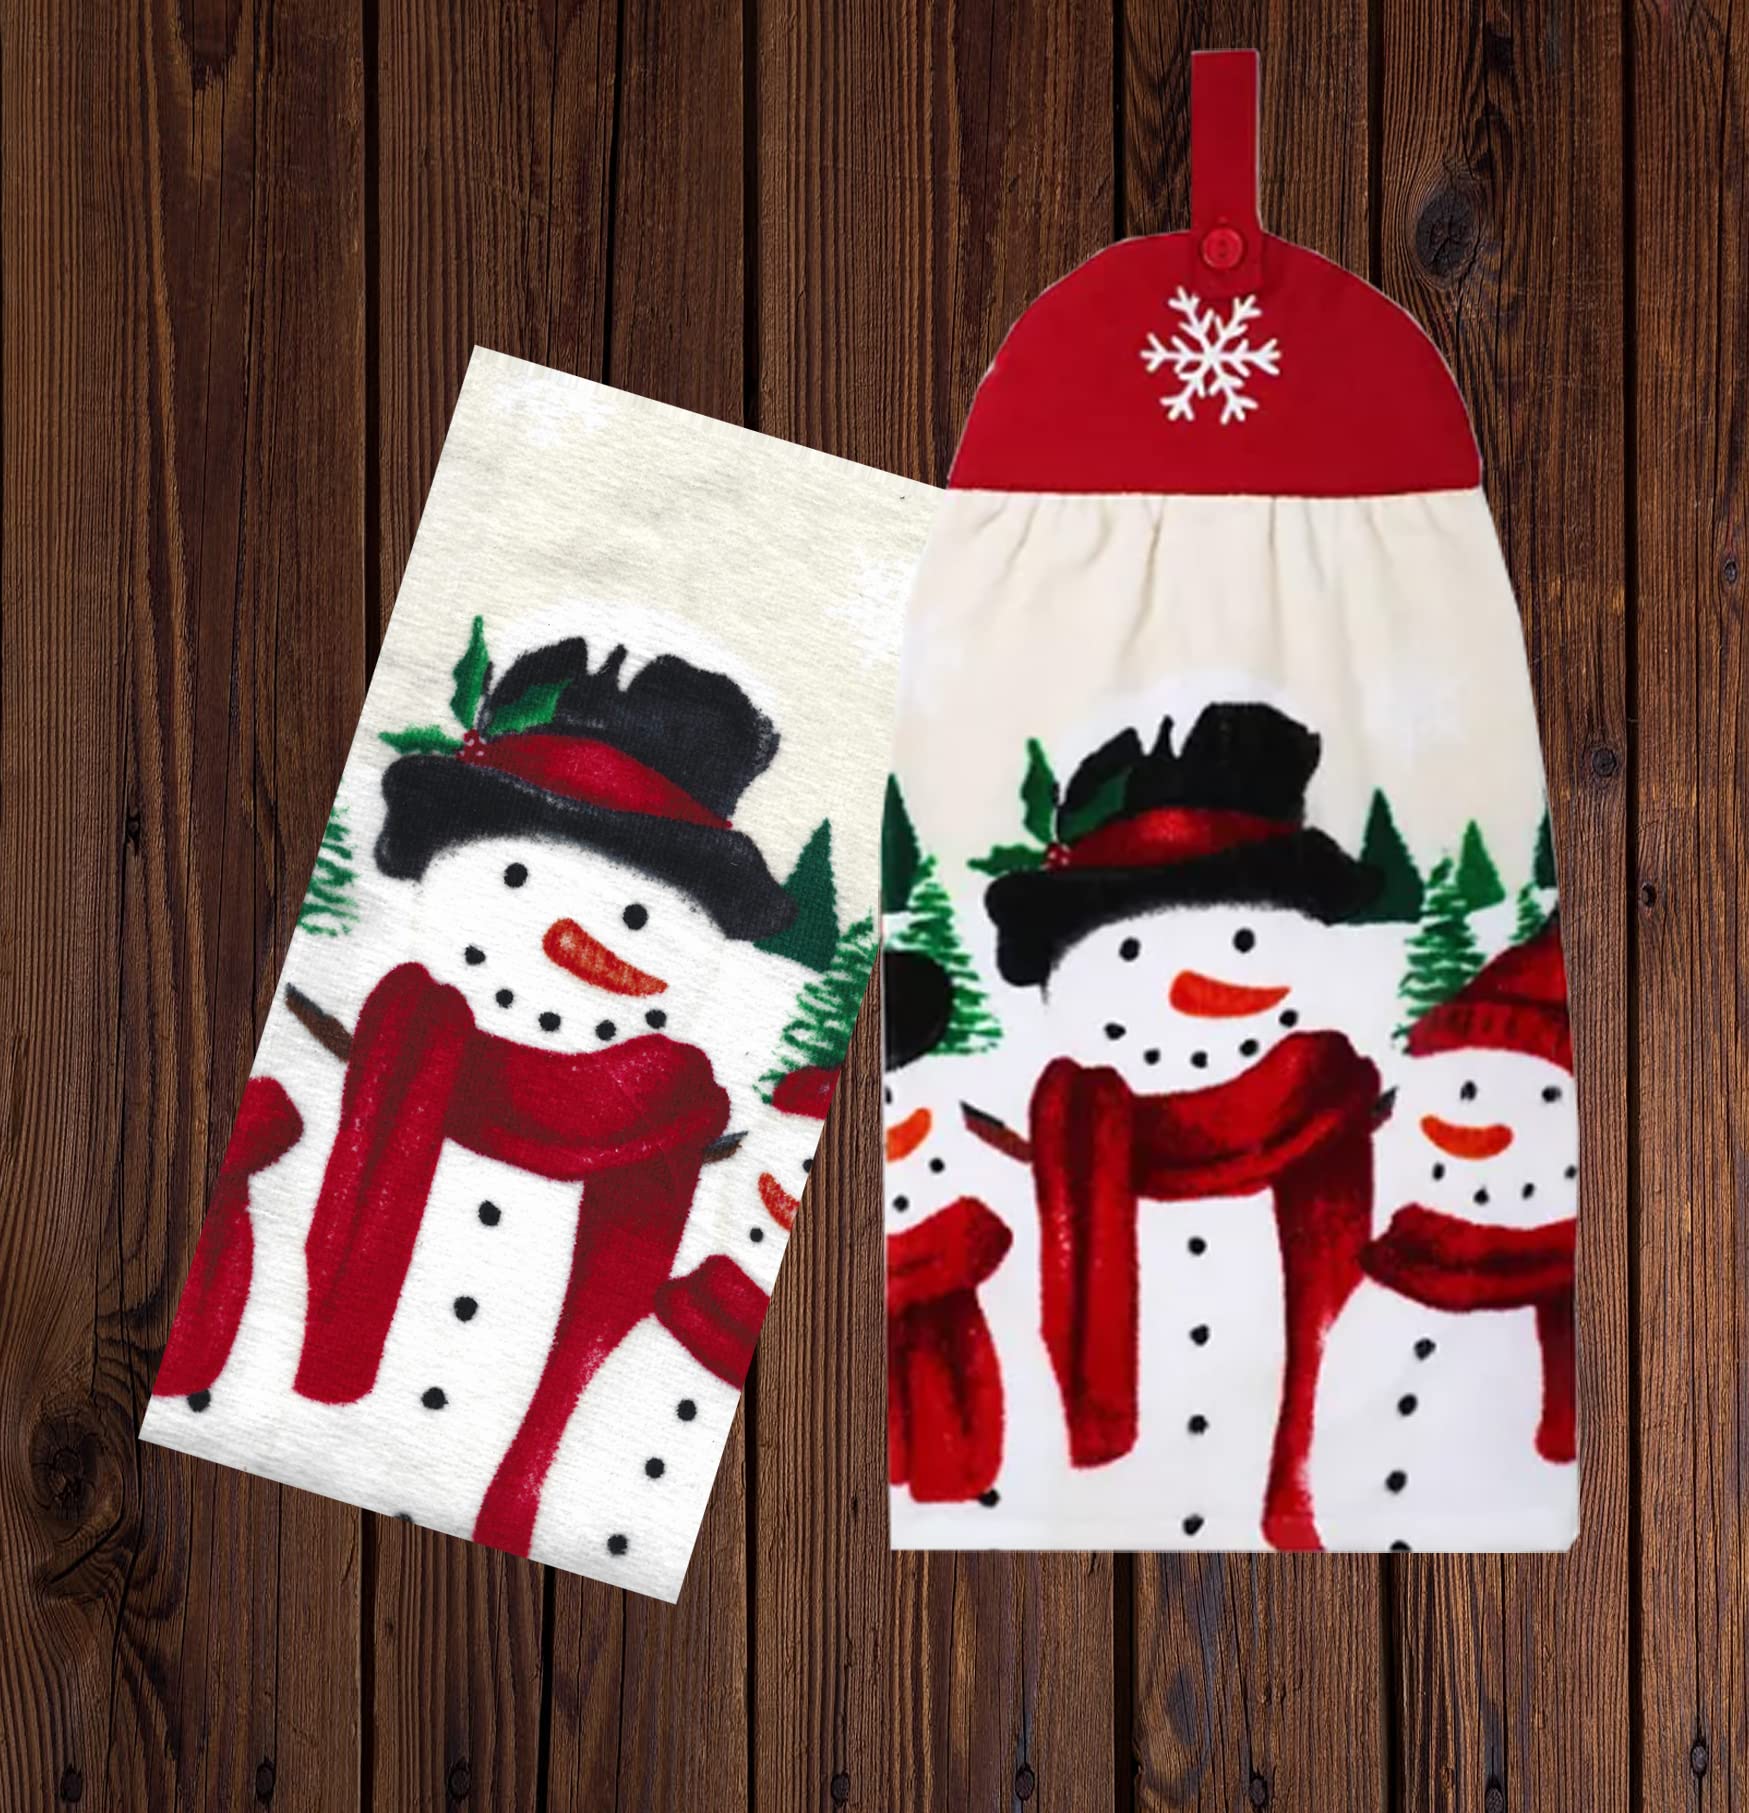 St. Nicholas Square Christmas Kitchen Print Towels, Set of 2, One Hanging Tie-Top with Button Loop Cotton Terry Towel Snowman Family for and Household Red, Black, Beige, Green, Orange 16 x 25 inches